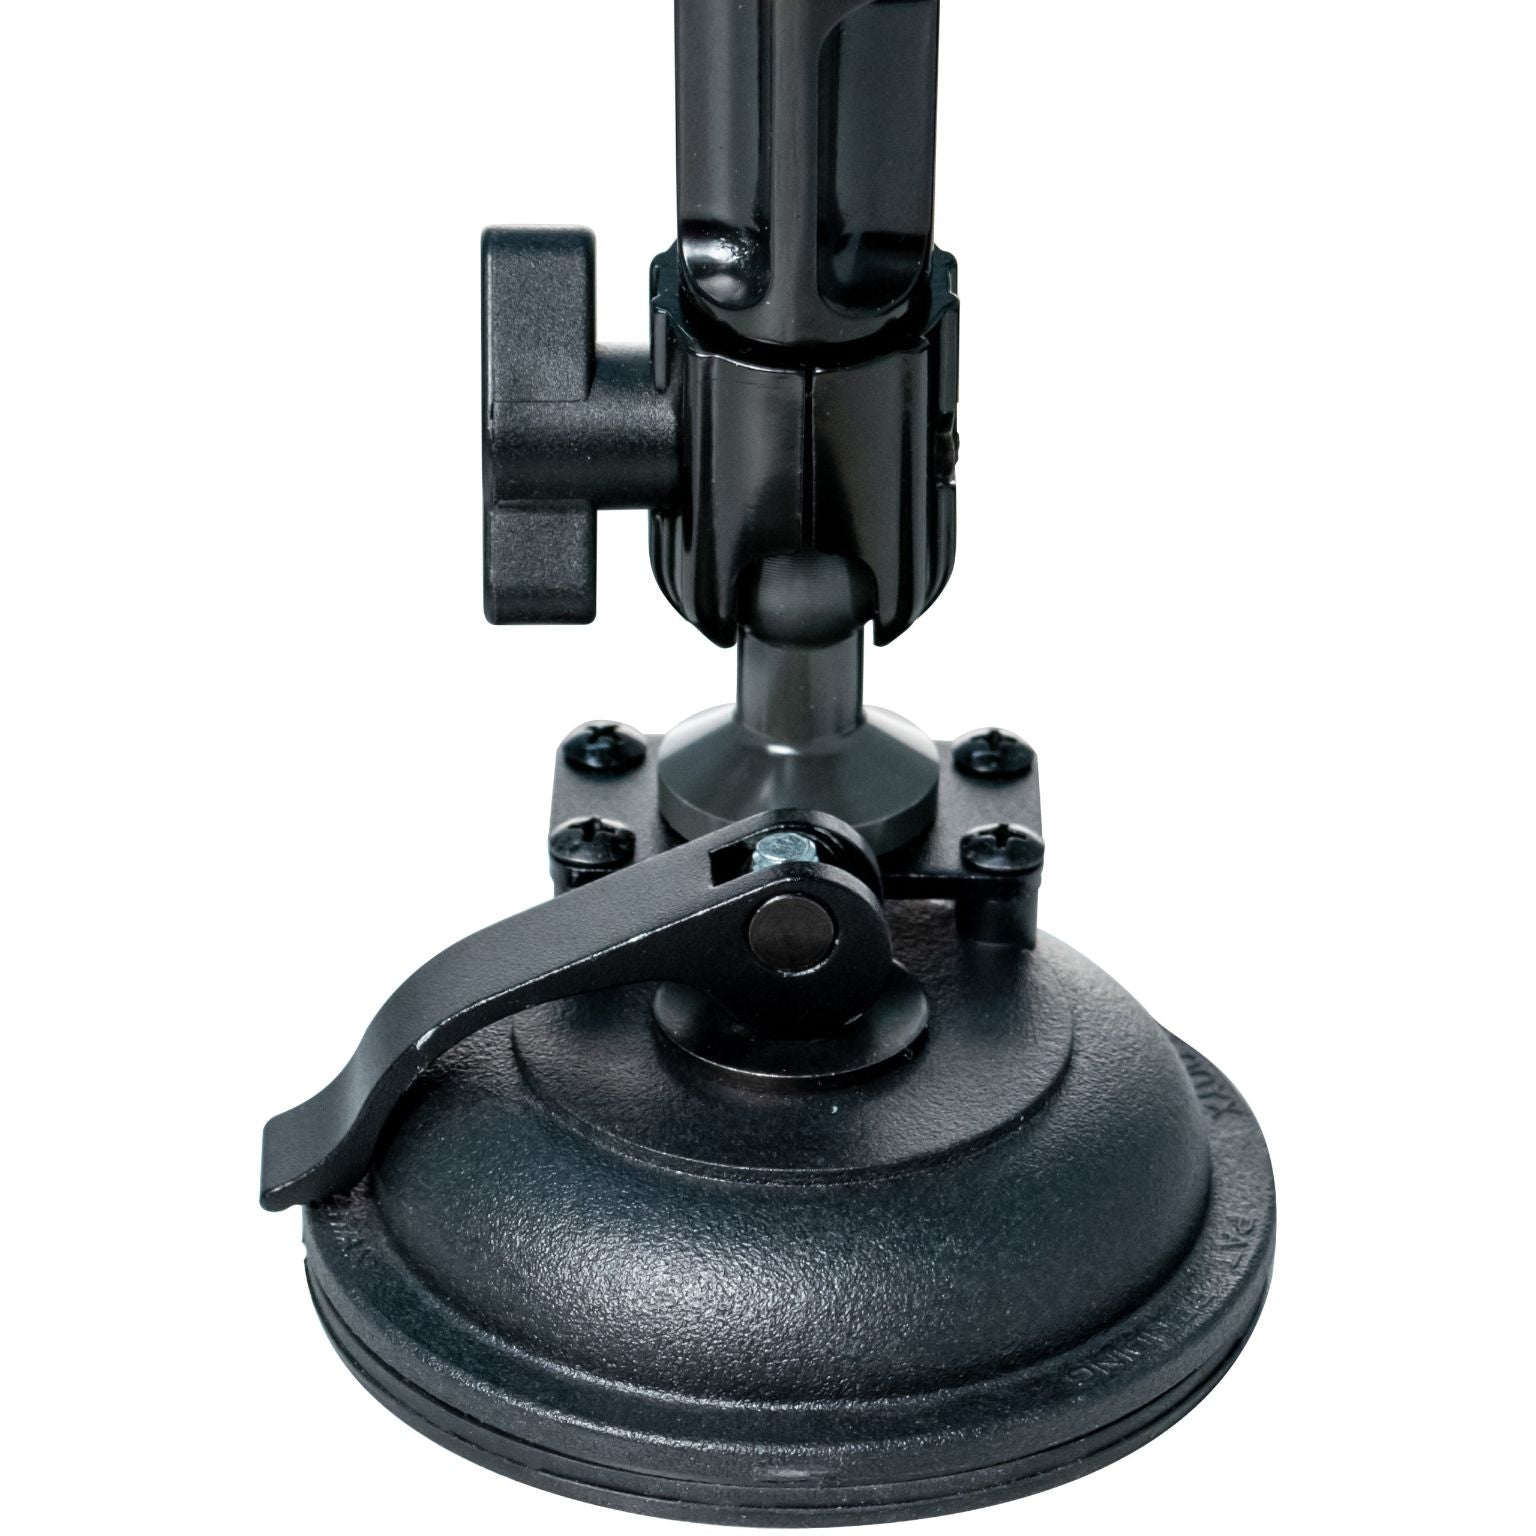 Custom Flex Suction Mount for 7-14 Inch Tablets